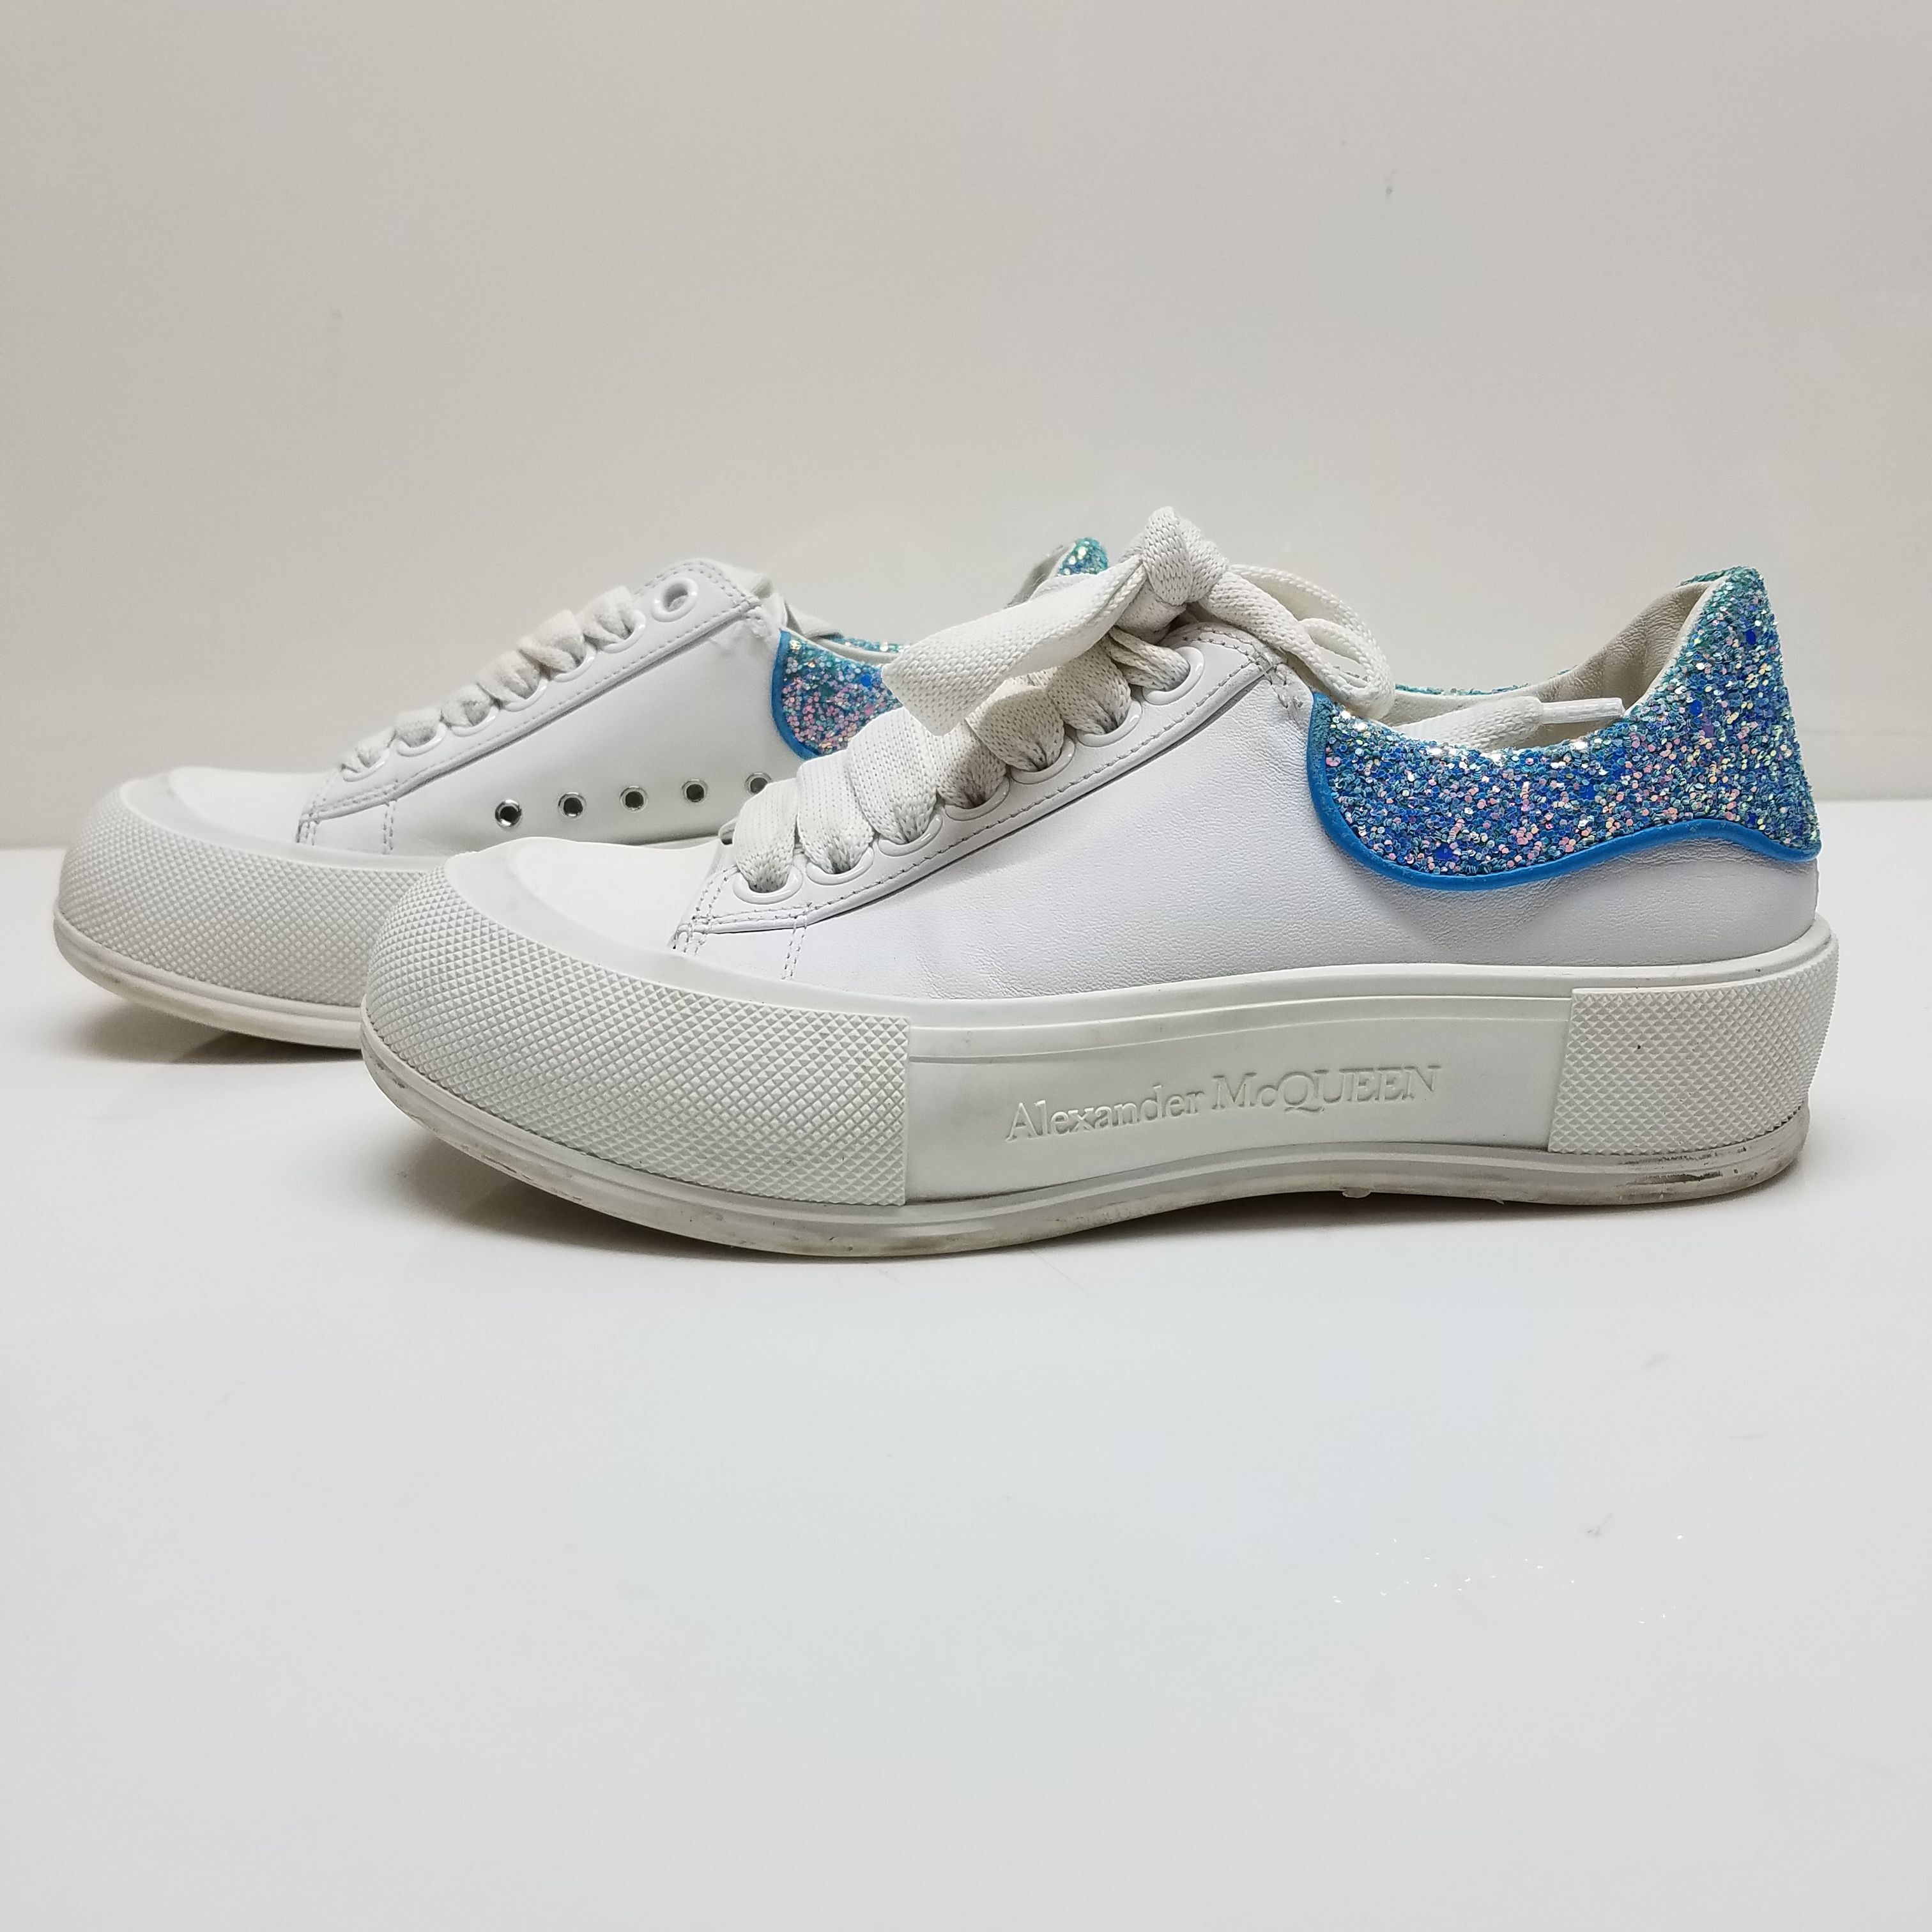 Alexander Mcqueen Woman White Leather Sneakers With Embellished Fabric Heel  - Walmart.com